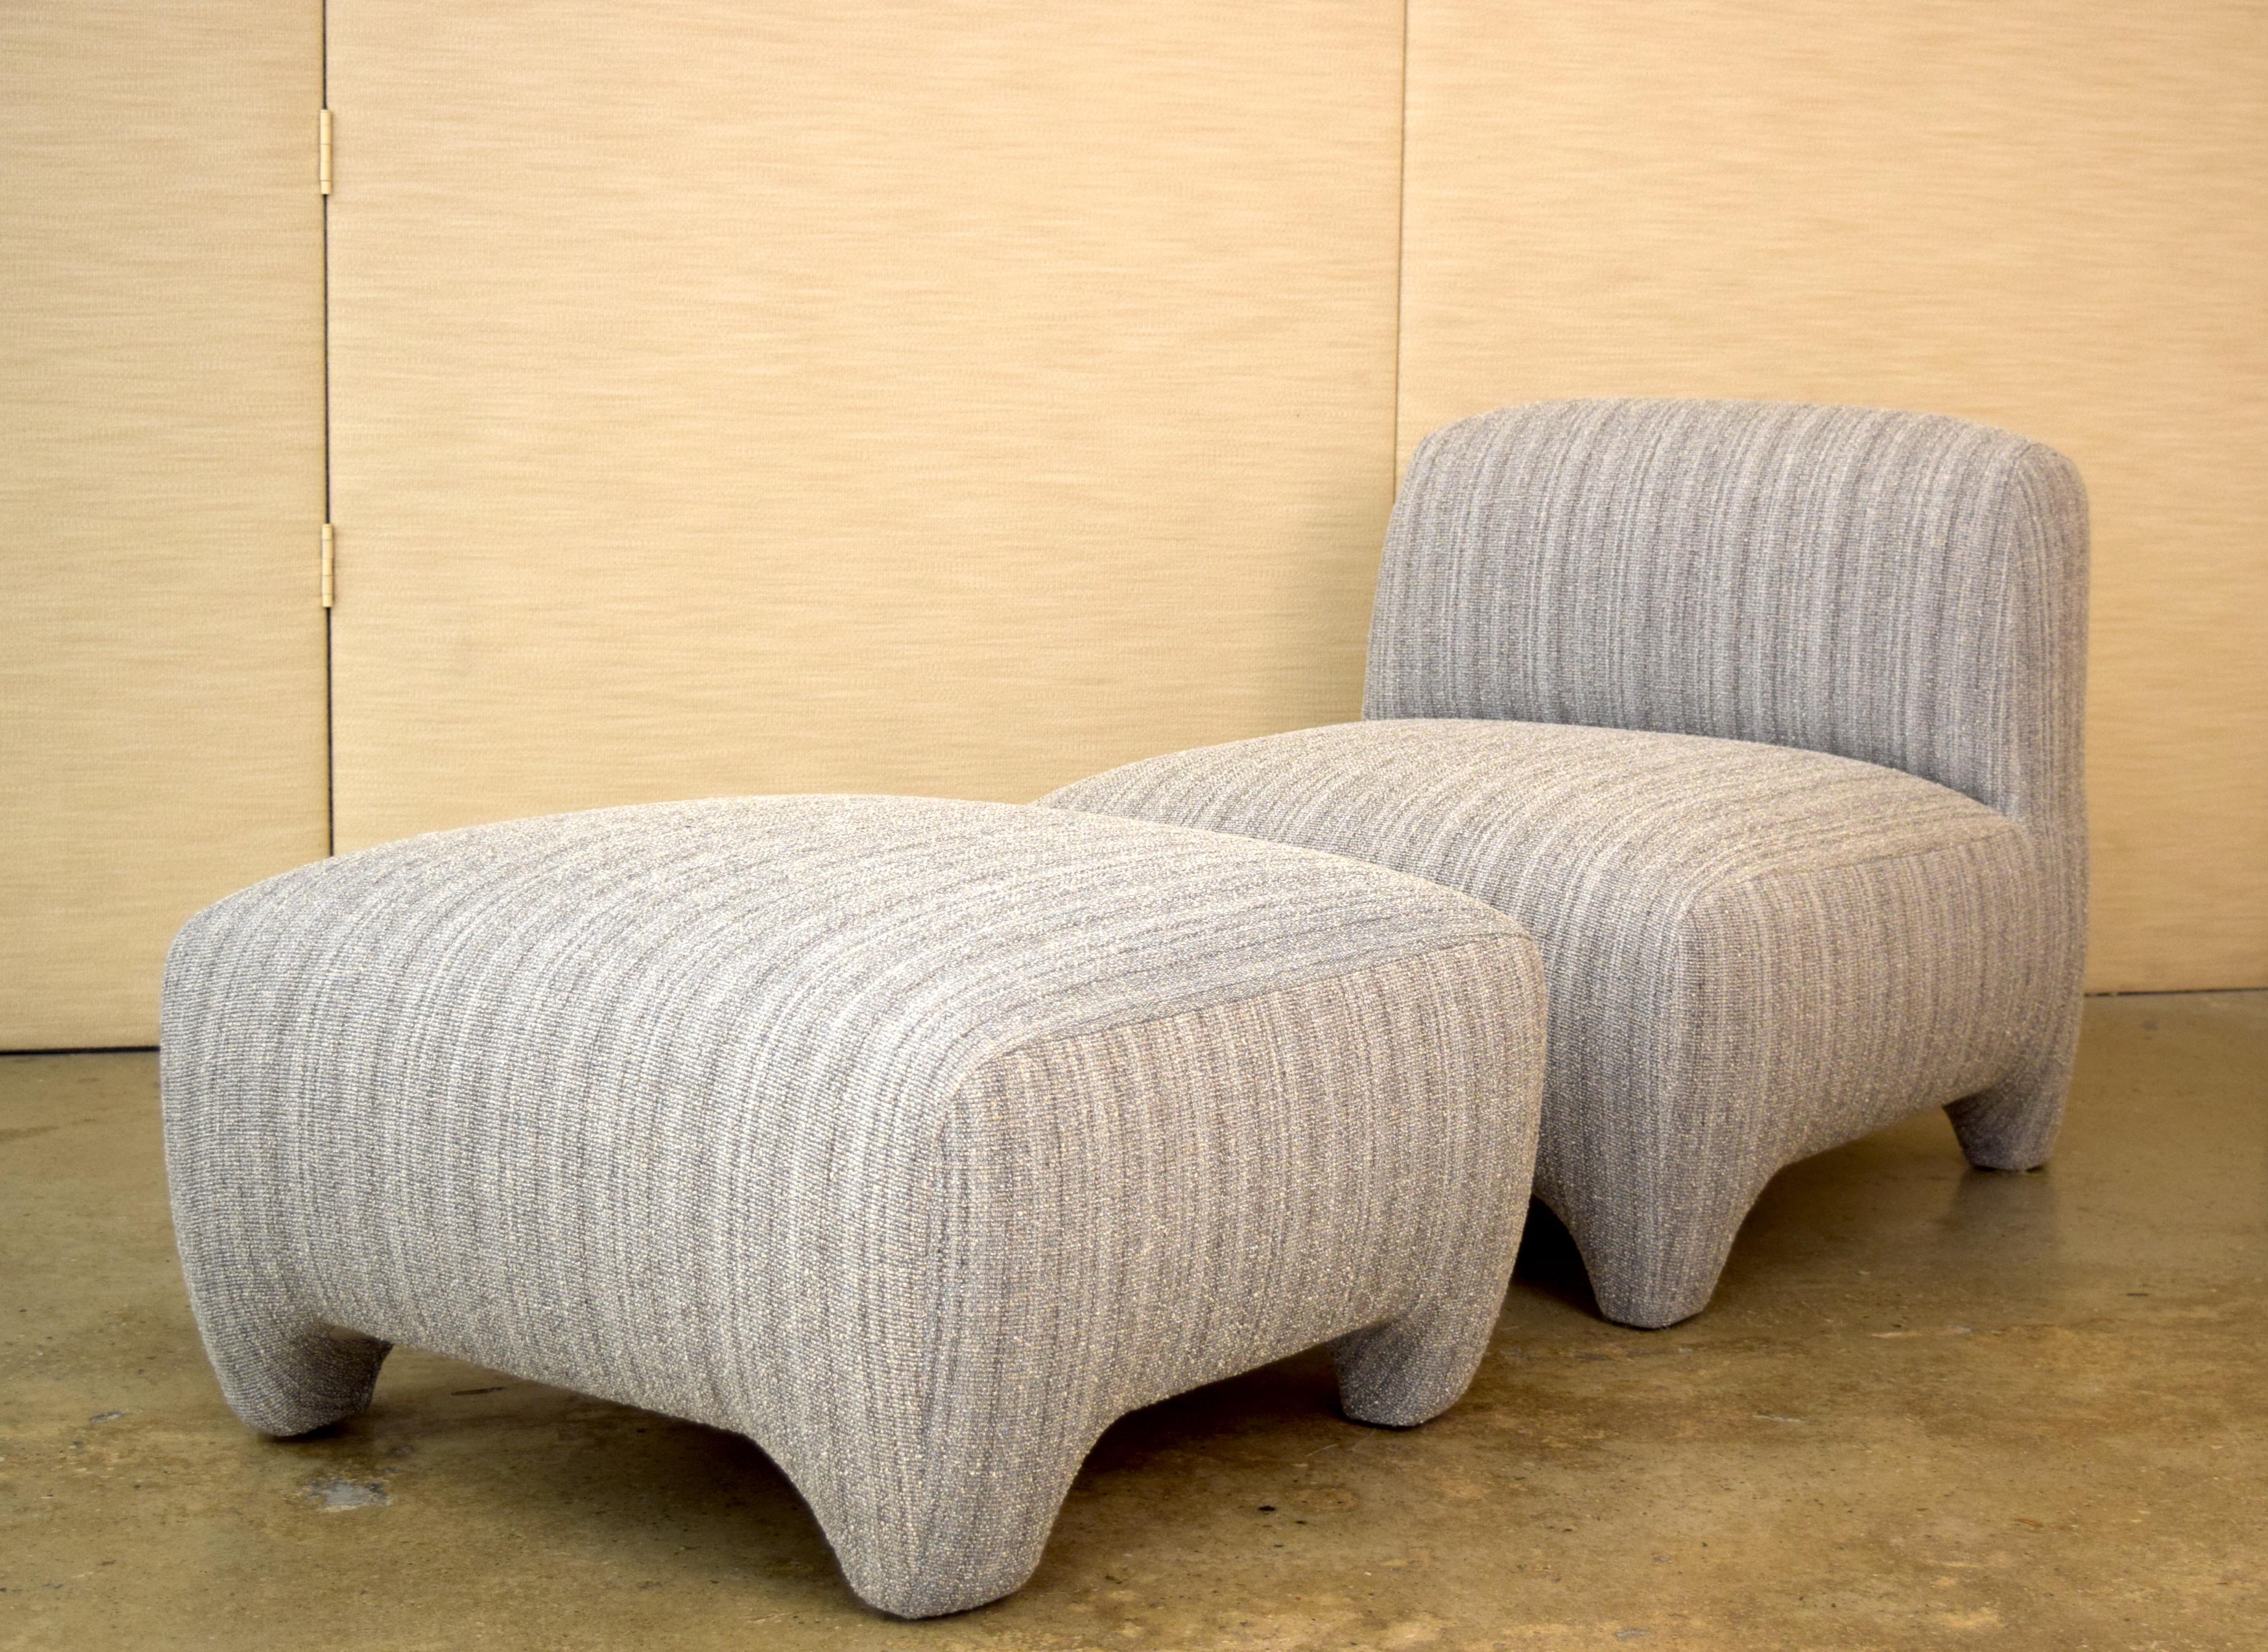 Tinatin Kilaberidze's slipper chair and ottoman have her signature sophisticated yet sober lines.
It is extremely comfortable and perfectly upholstered. 

Measures: The ottoman is 16